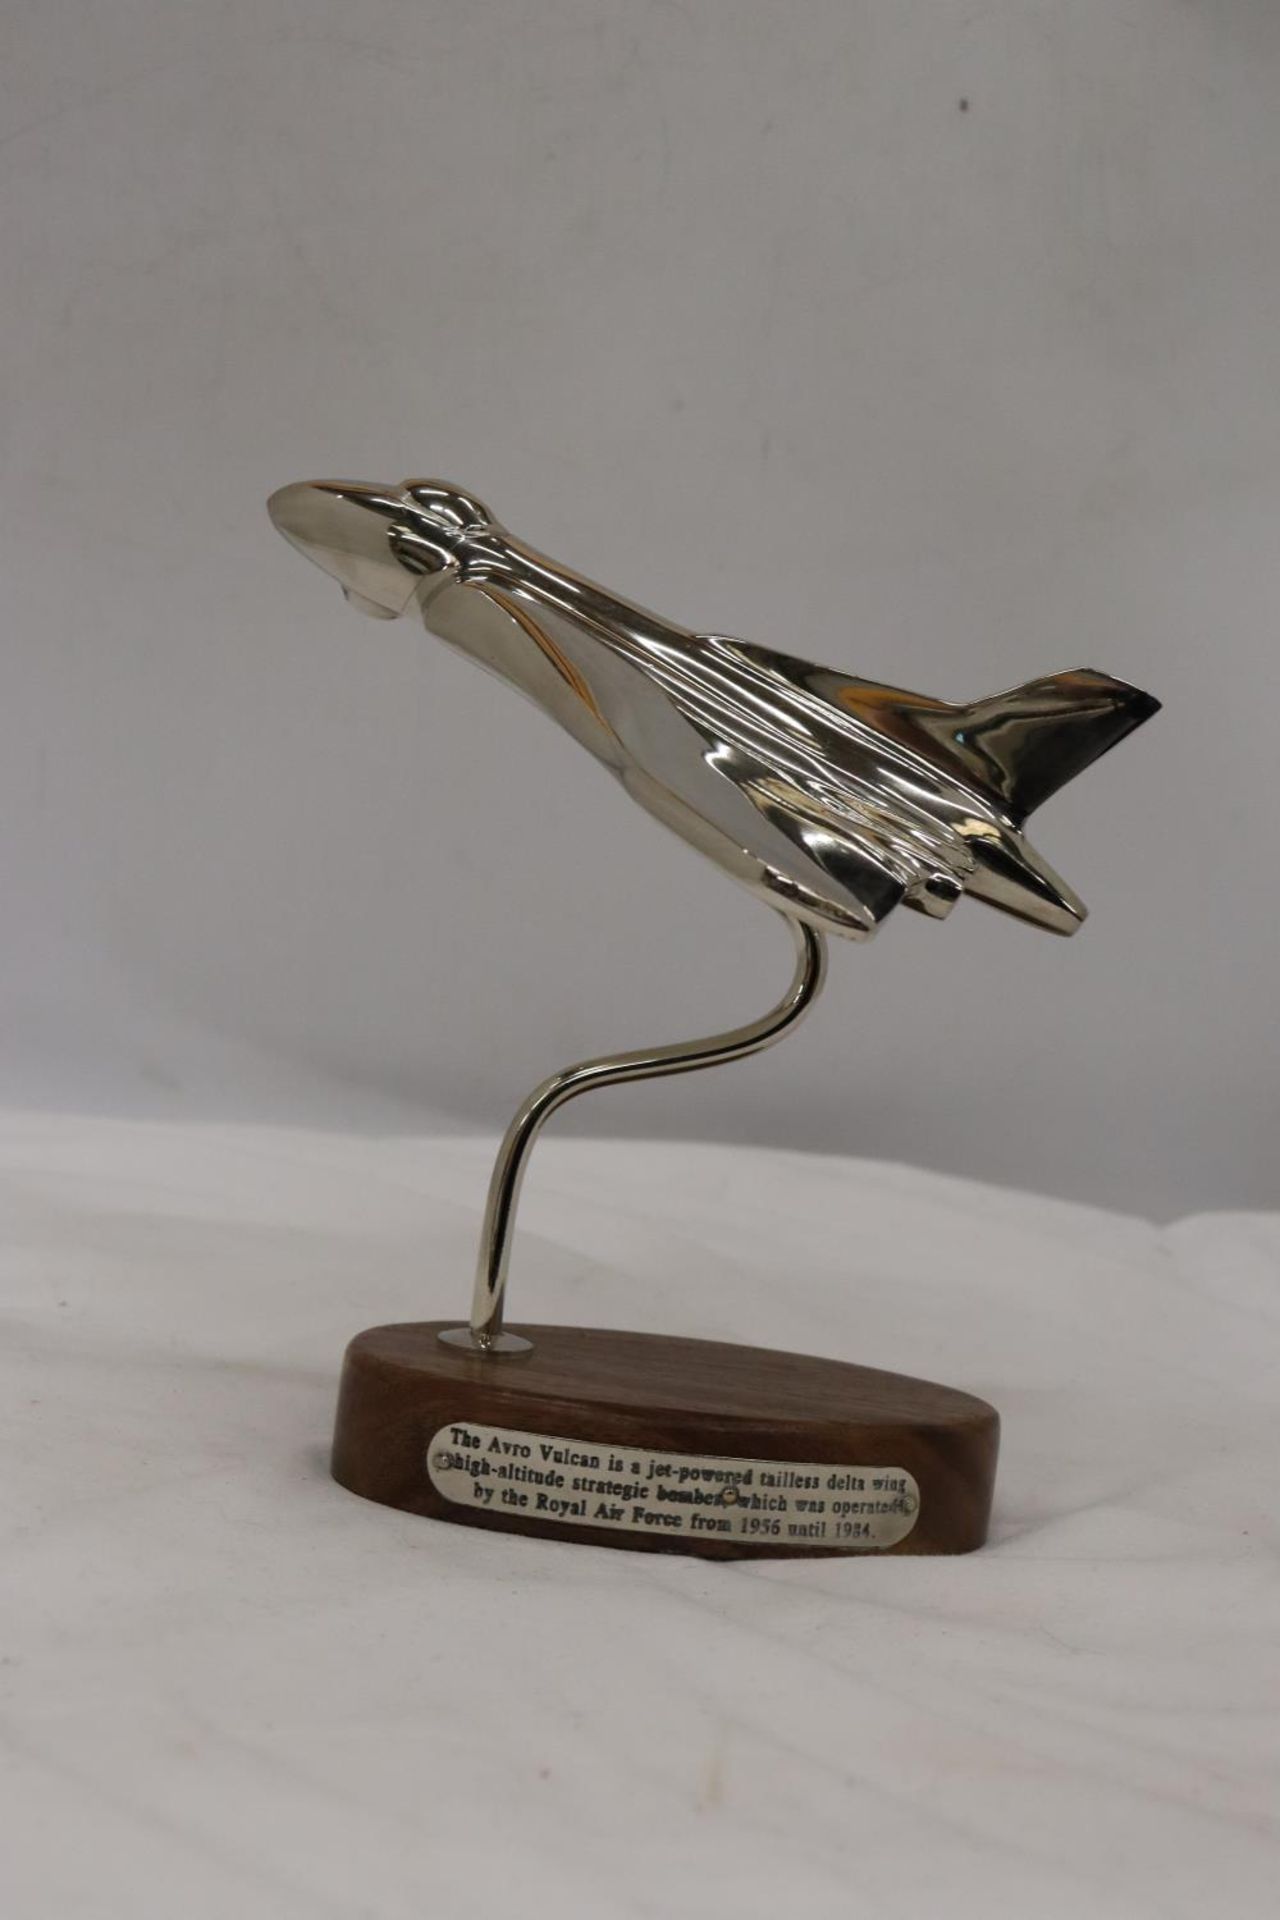 A CHROME MODEL OF AN AVRO VULCAN AEROPLANE ON A HARDWOOD BASE WITH HISTORY PLAQUE, HEIGHT 20 CM